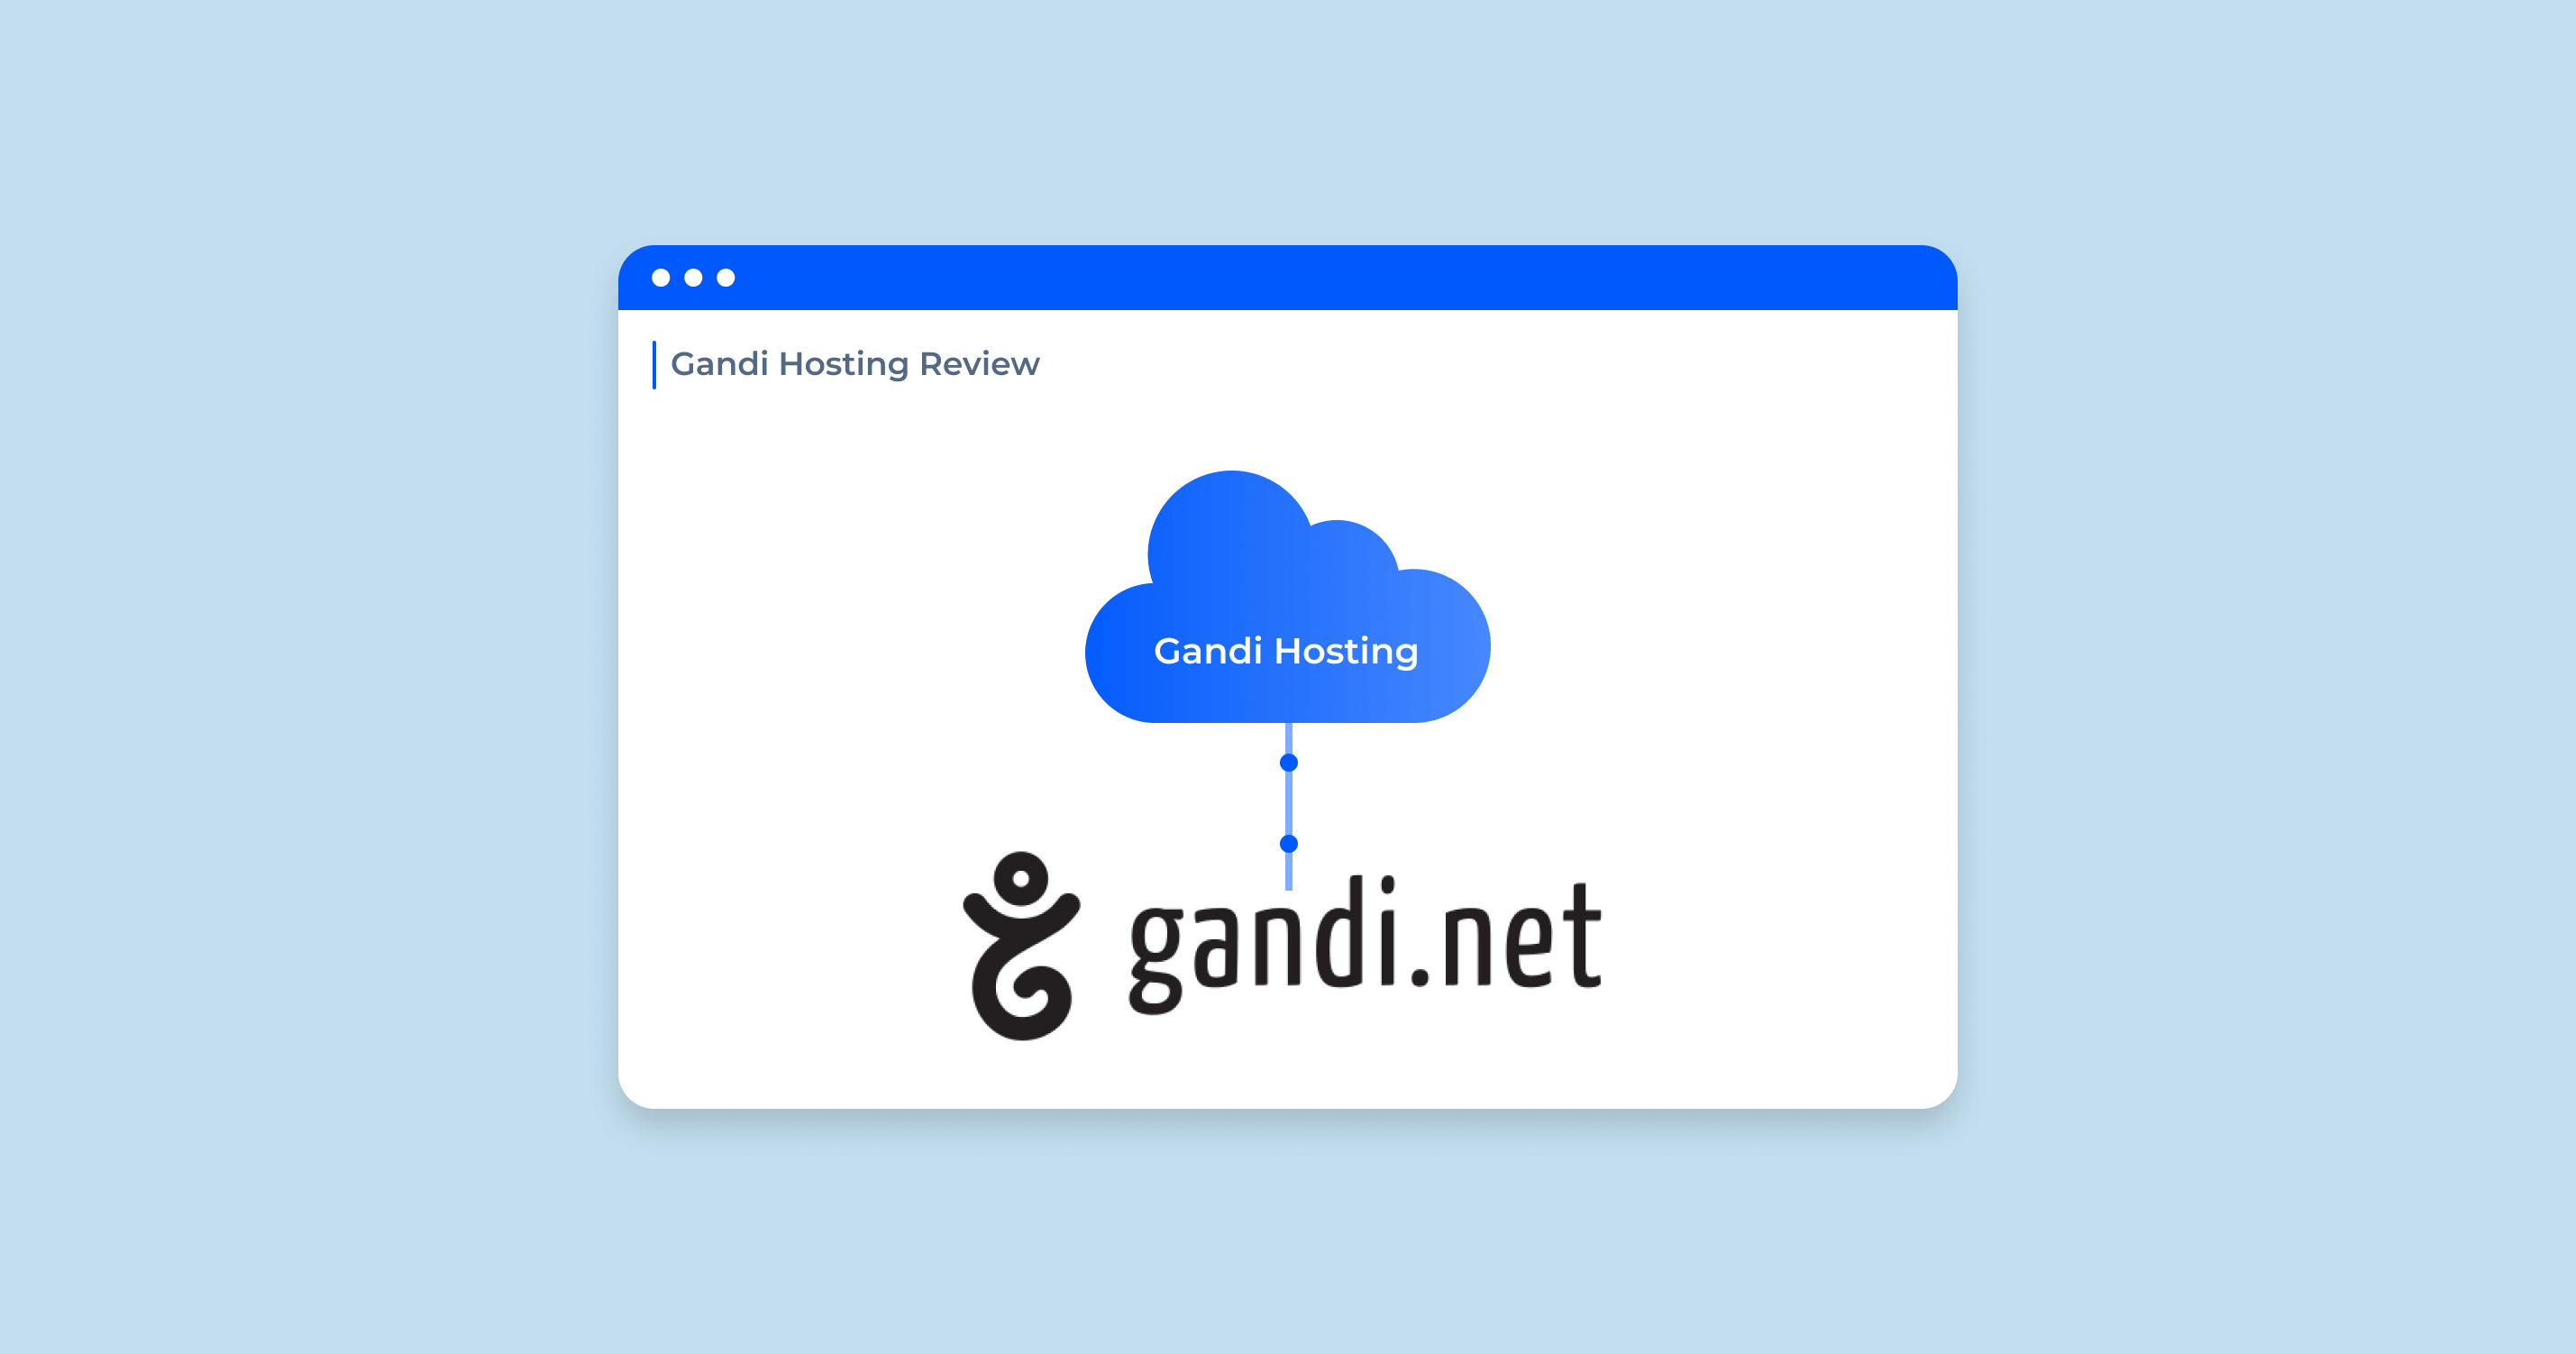 Gandi Hosting Review: What Is Critical For SEO